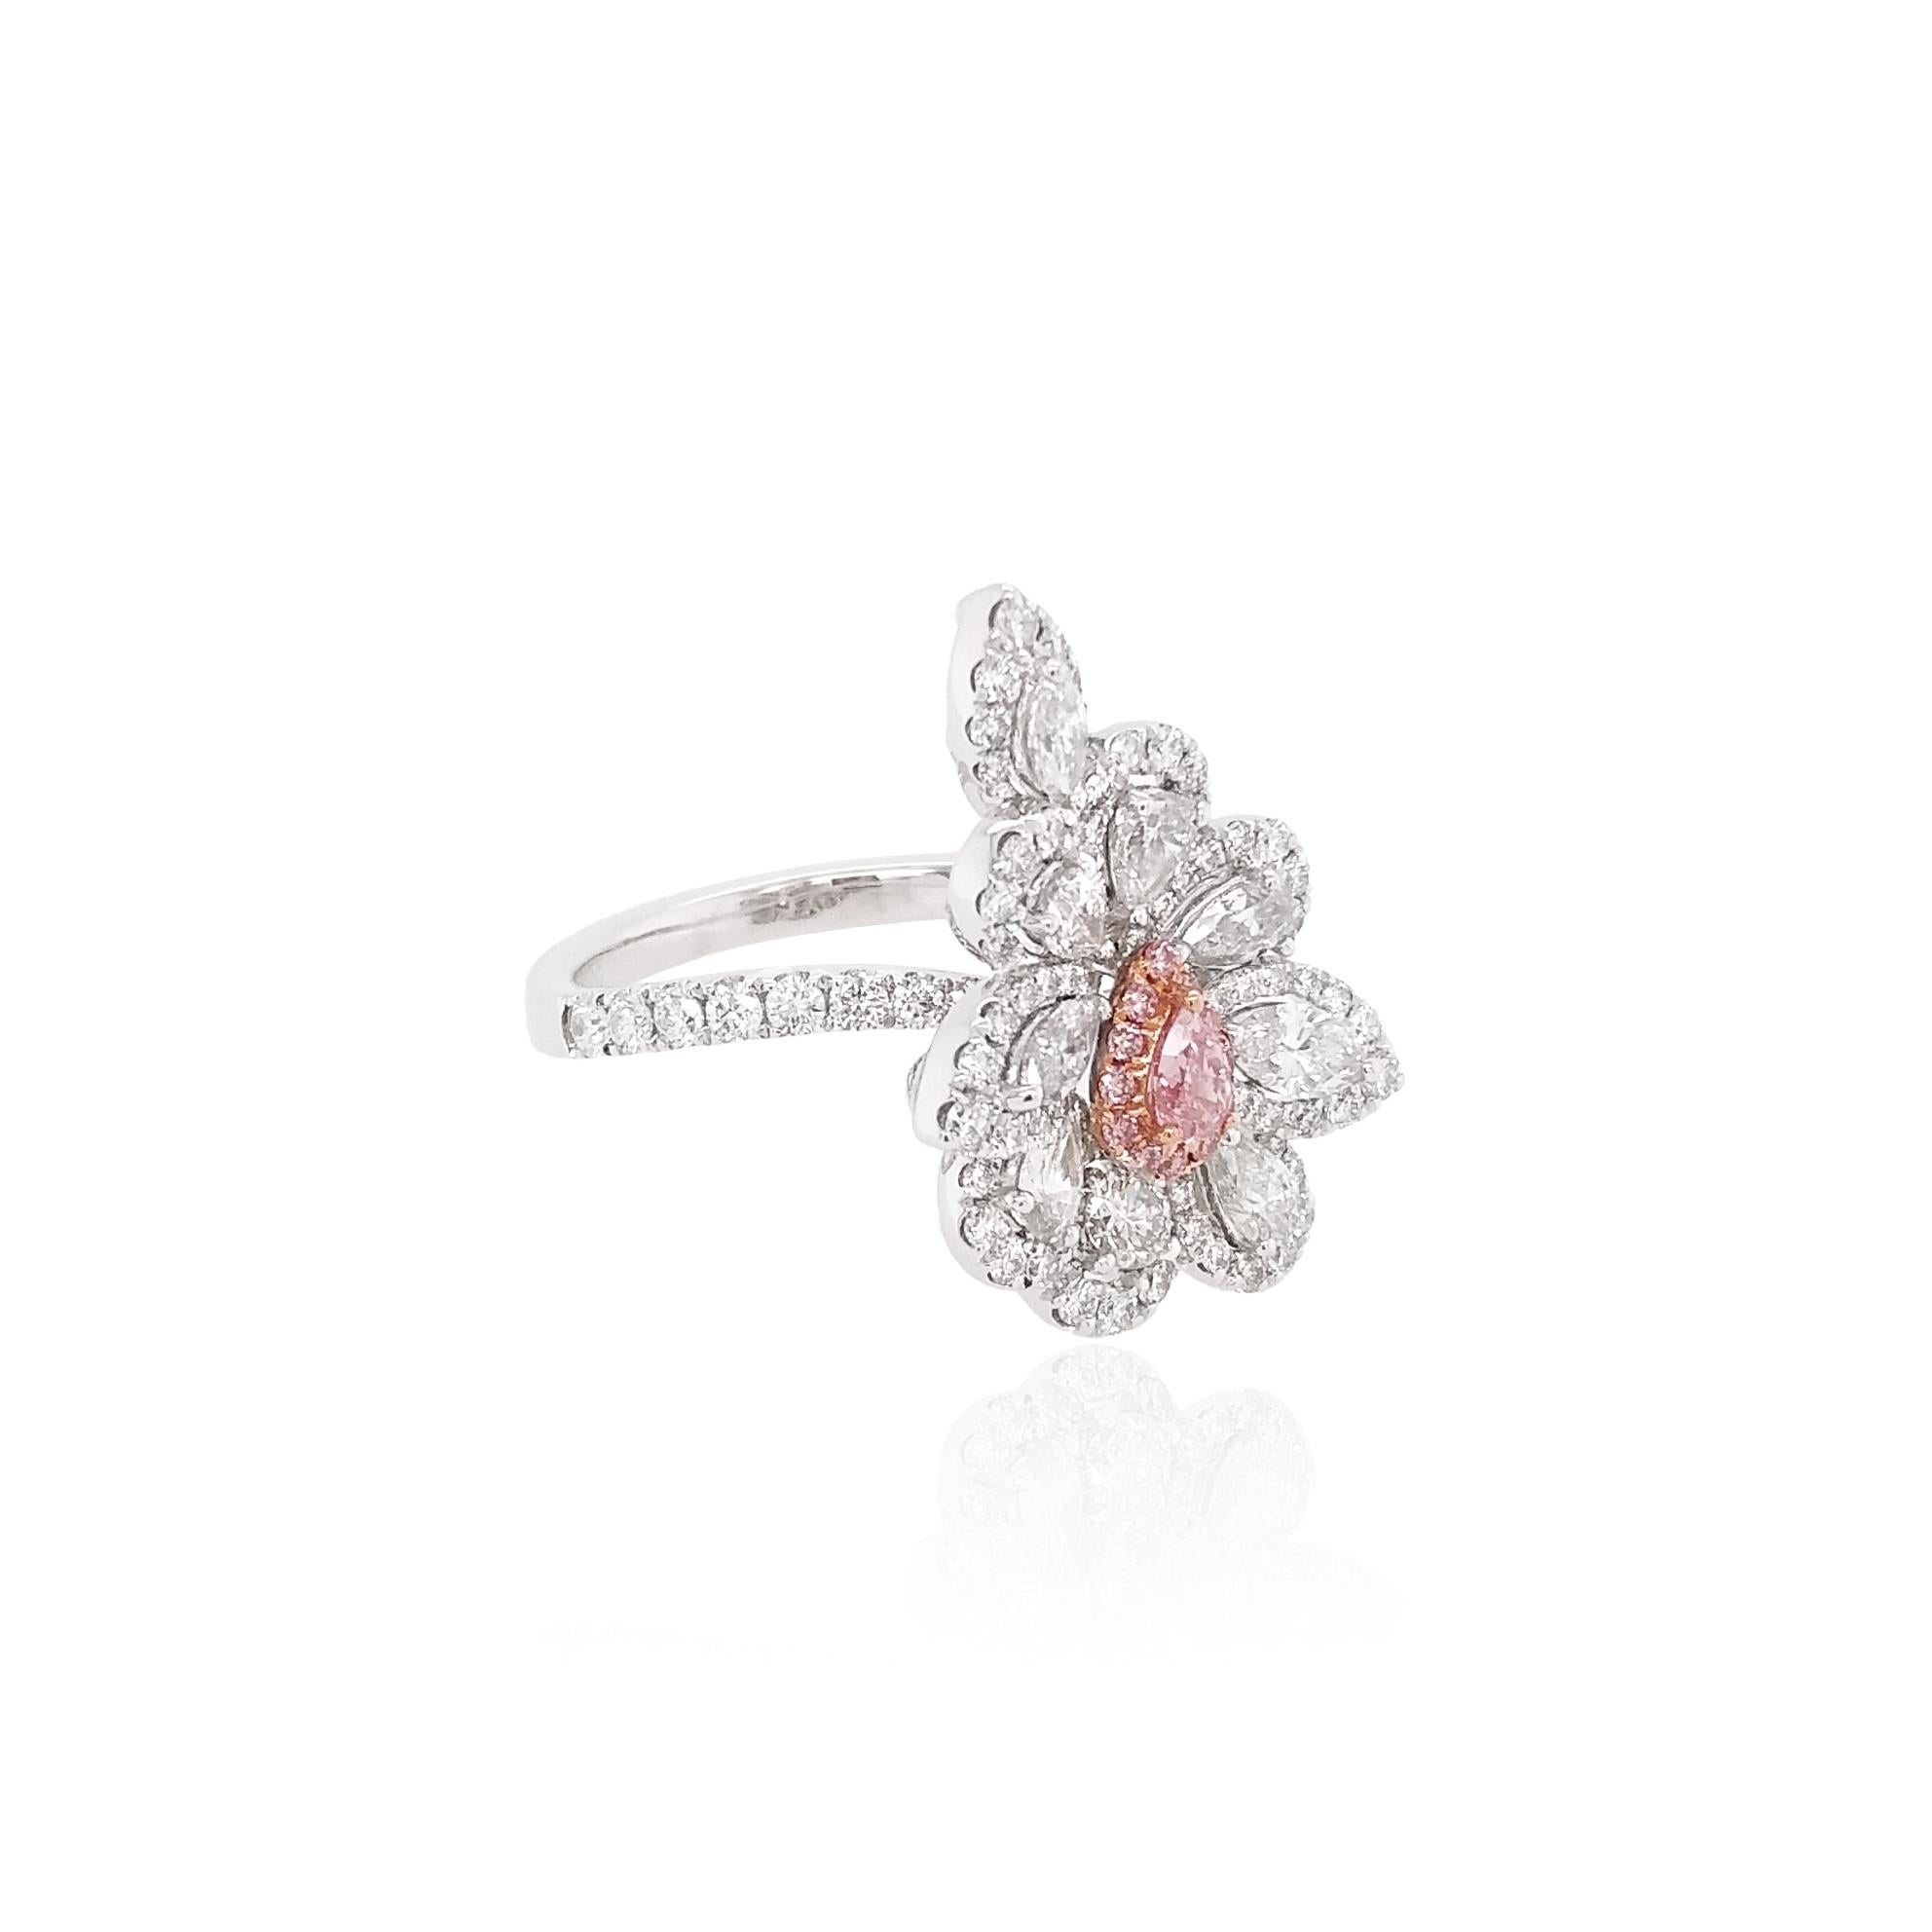 Pear Cut GIA Certified Pink Diamond and White Diamond in Platinum Cocktail Ring